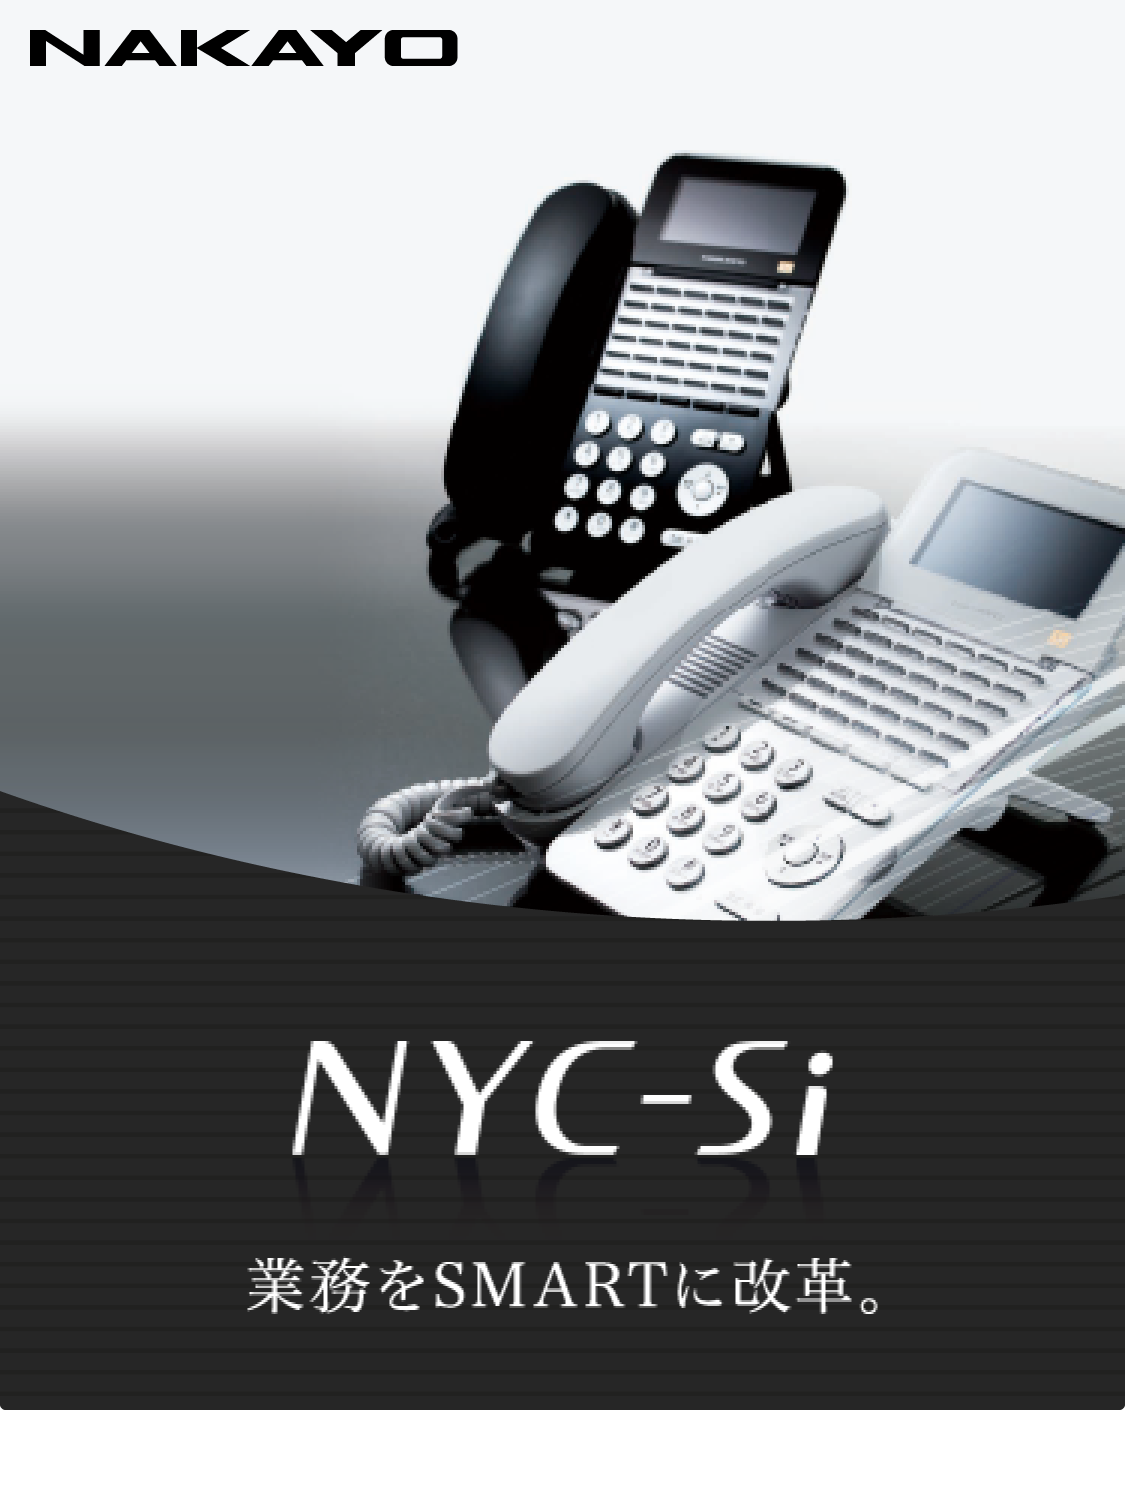 IP Telephony System NYC-Si